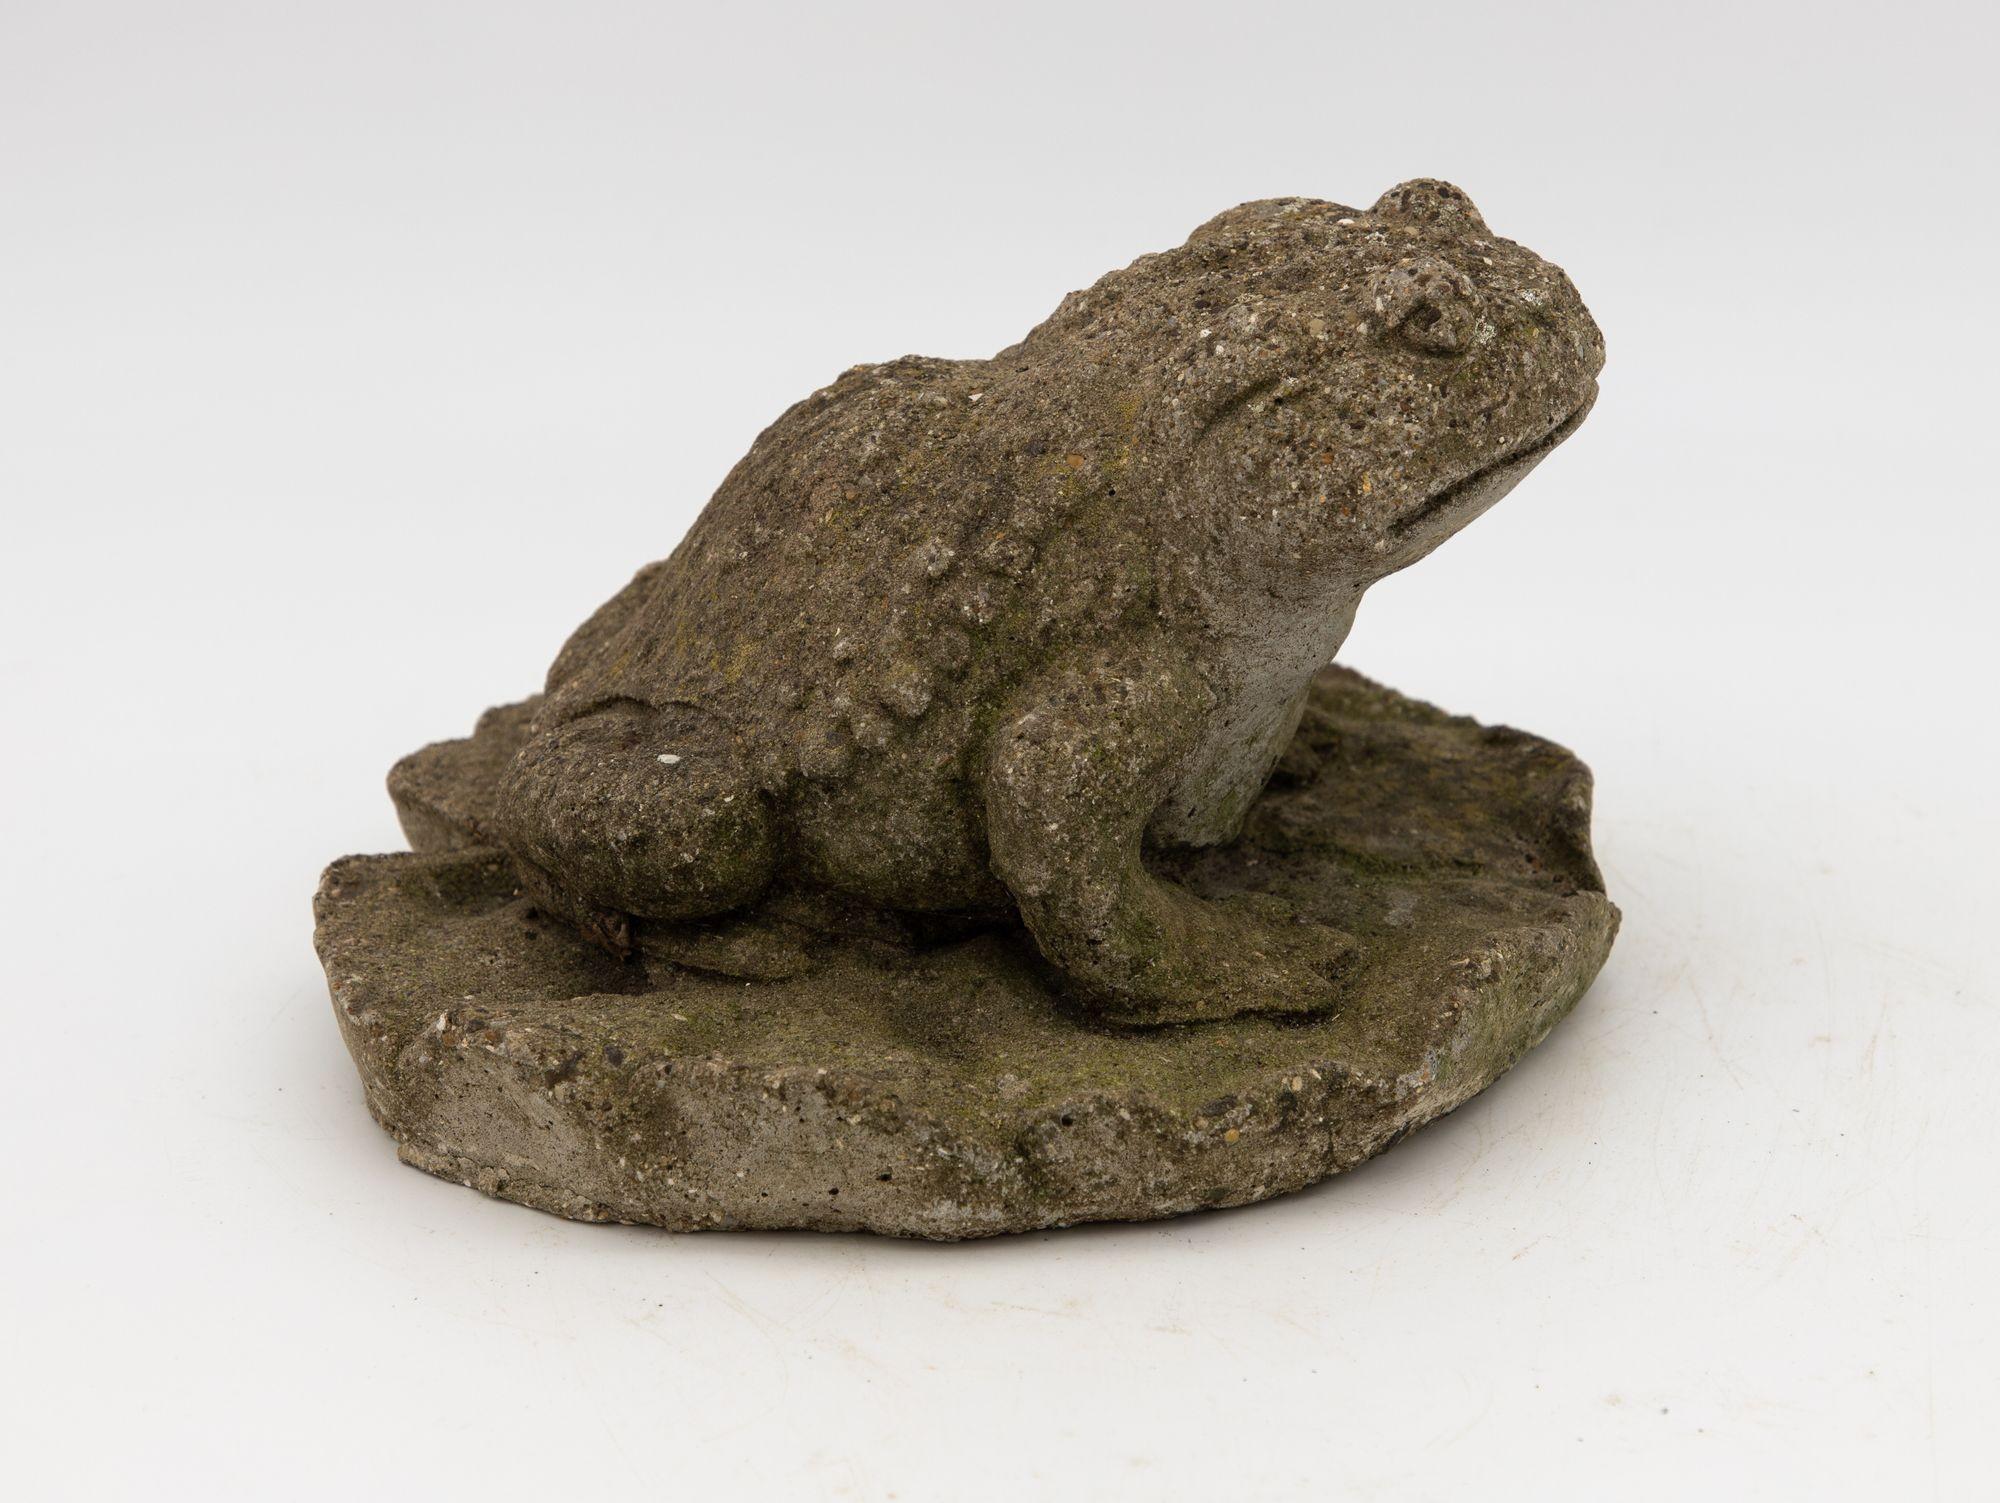 A mid 20th century stone seated frog as a fountain garden ornament. Lovely detail creates a lifelife look. Wear consistent with age and use.